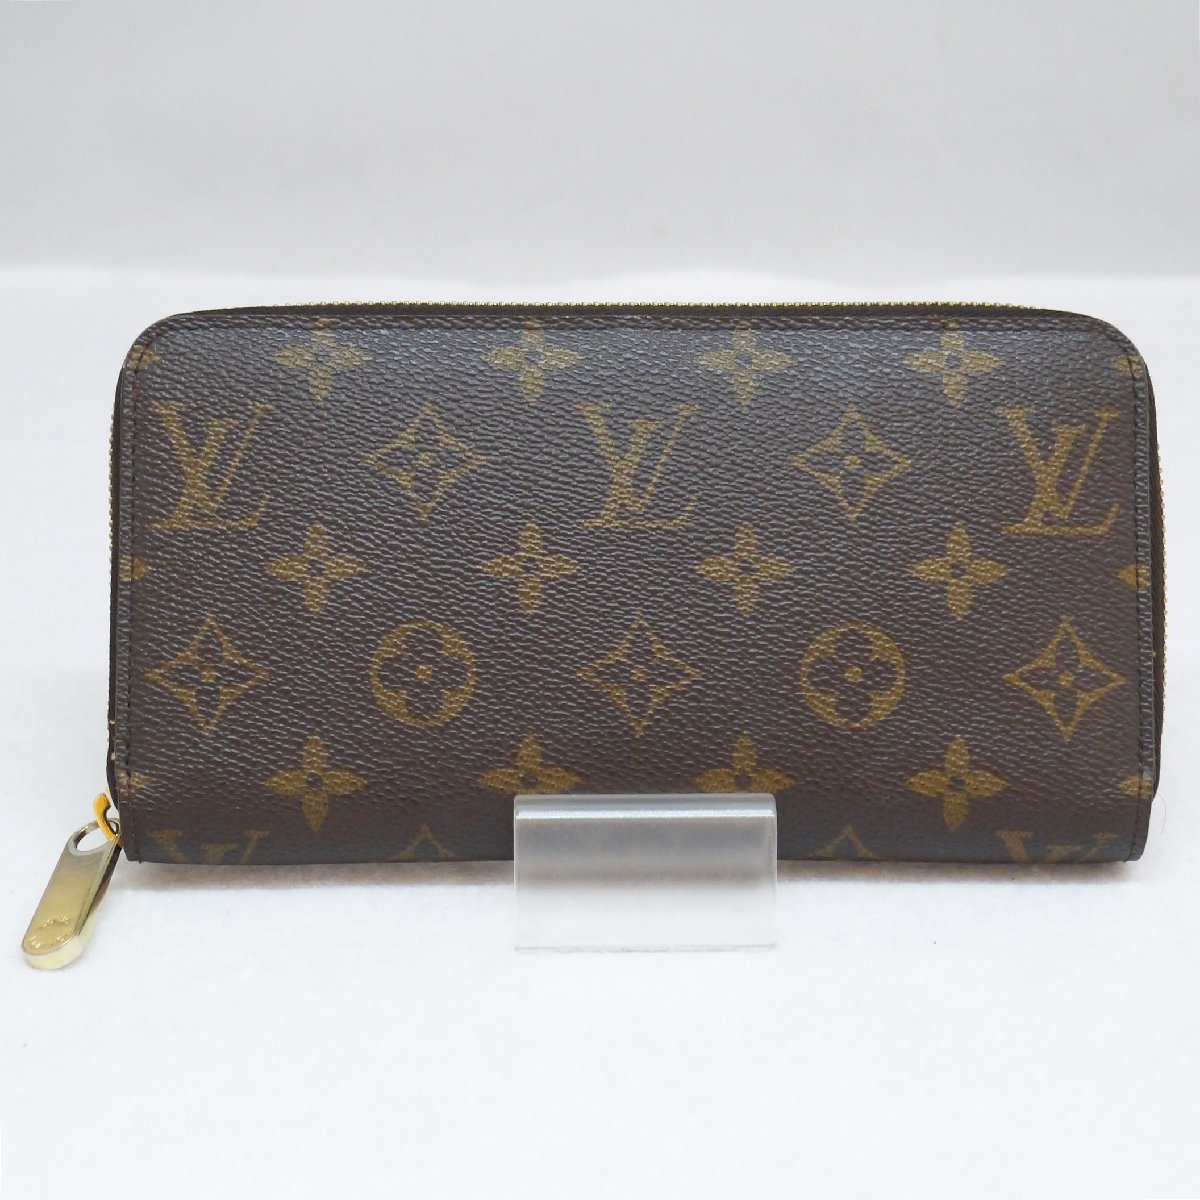 USED品・保管品 Louis Vuitton ルイヴィトン M41896 ジッピー